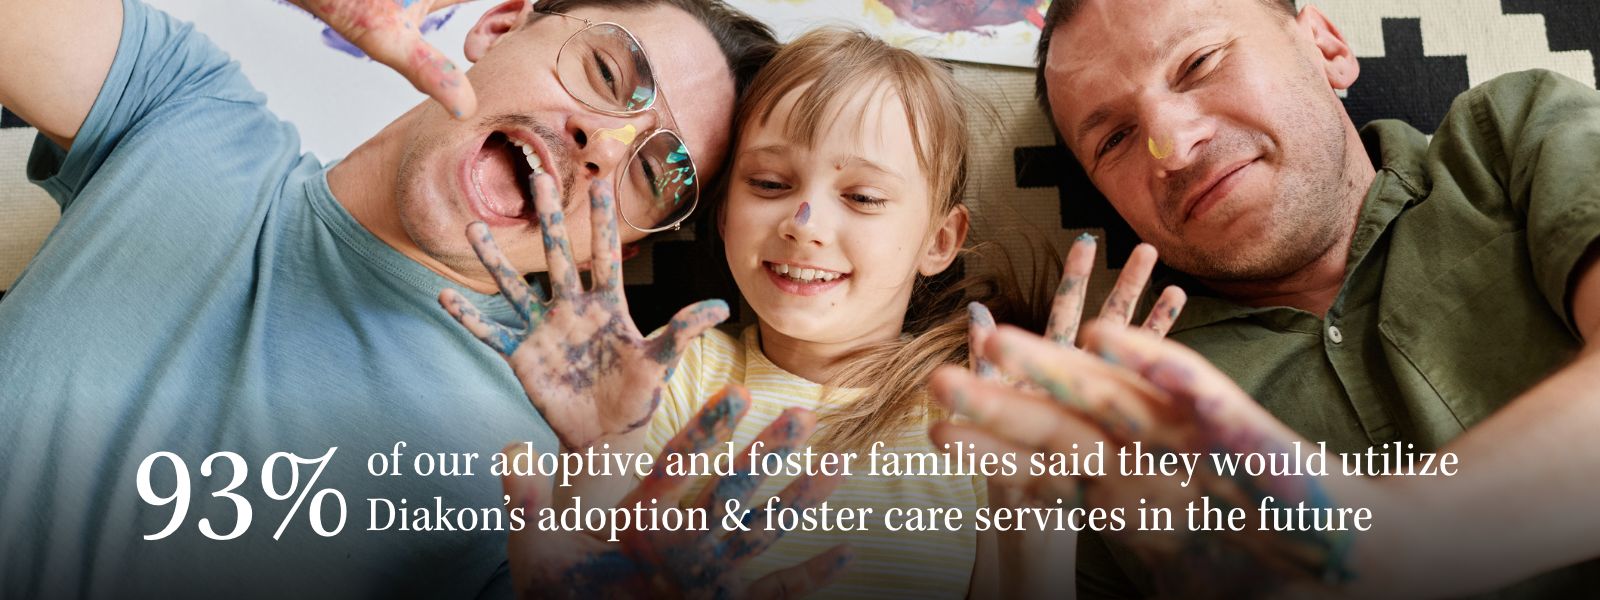 90% of our adoptive and foster families said they would utilize Diakon adoption & foster care services in the future